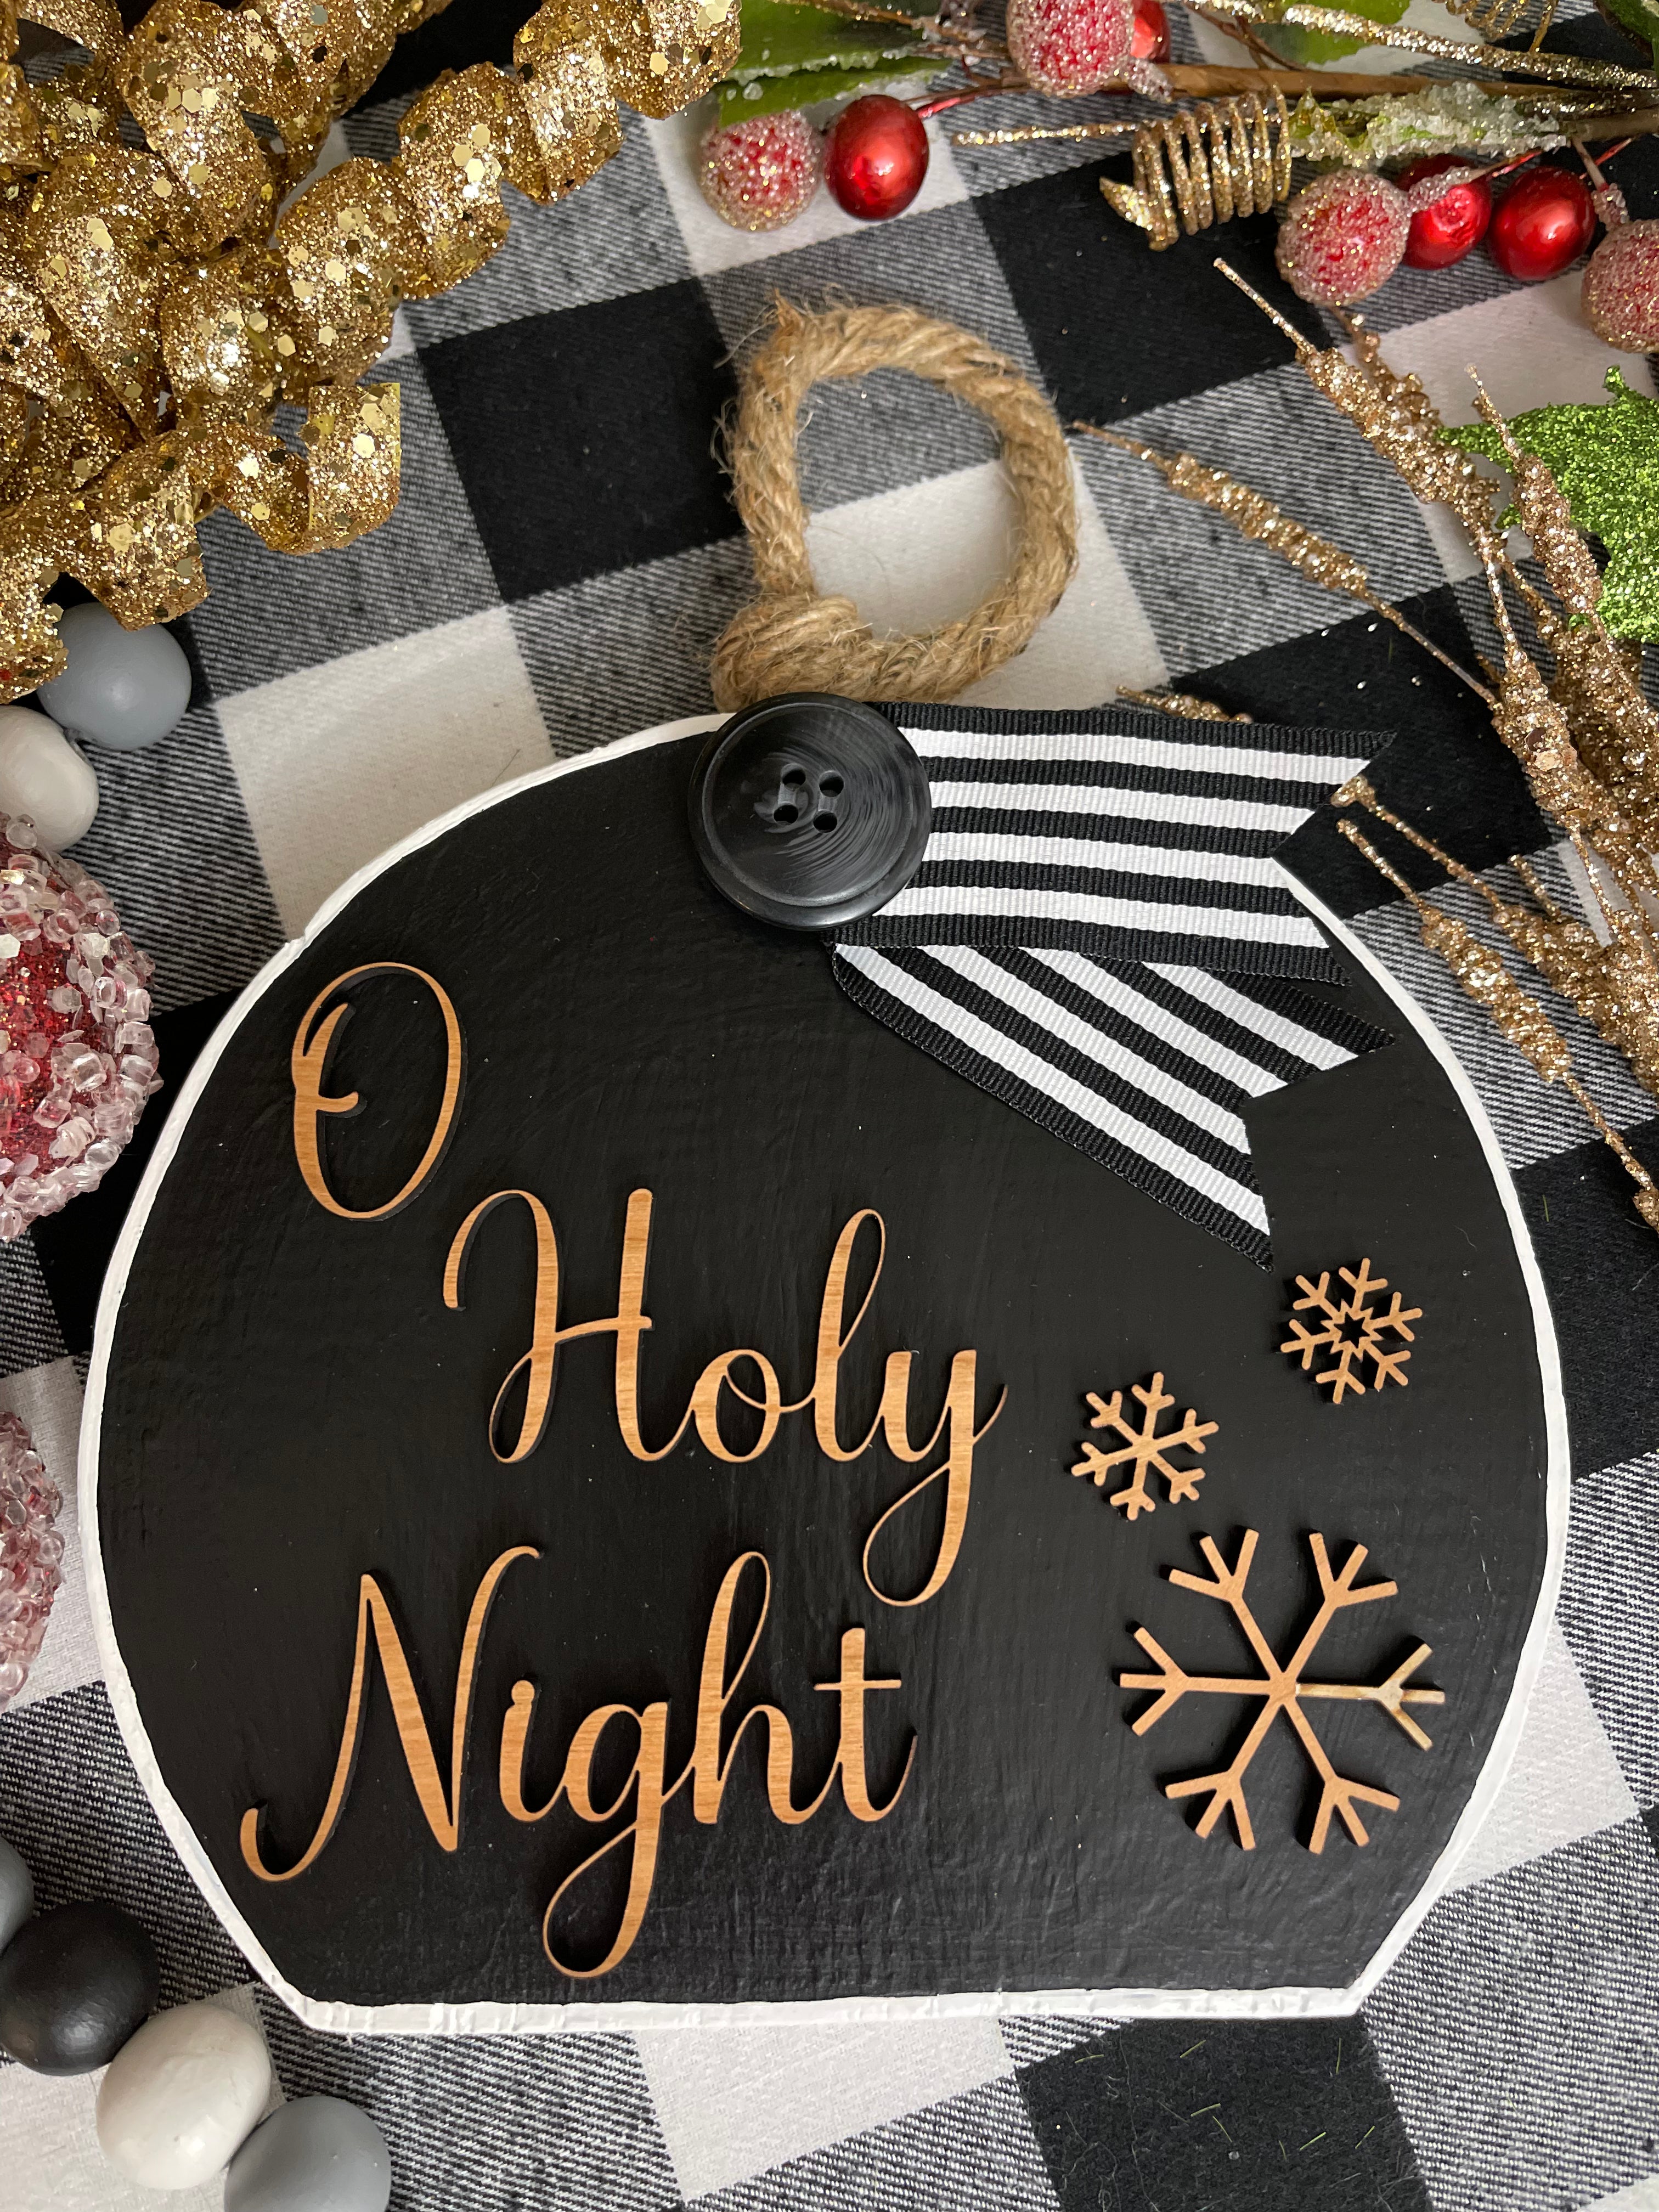 This image shows the large black O Holy Night.